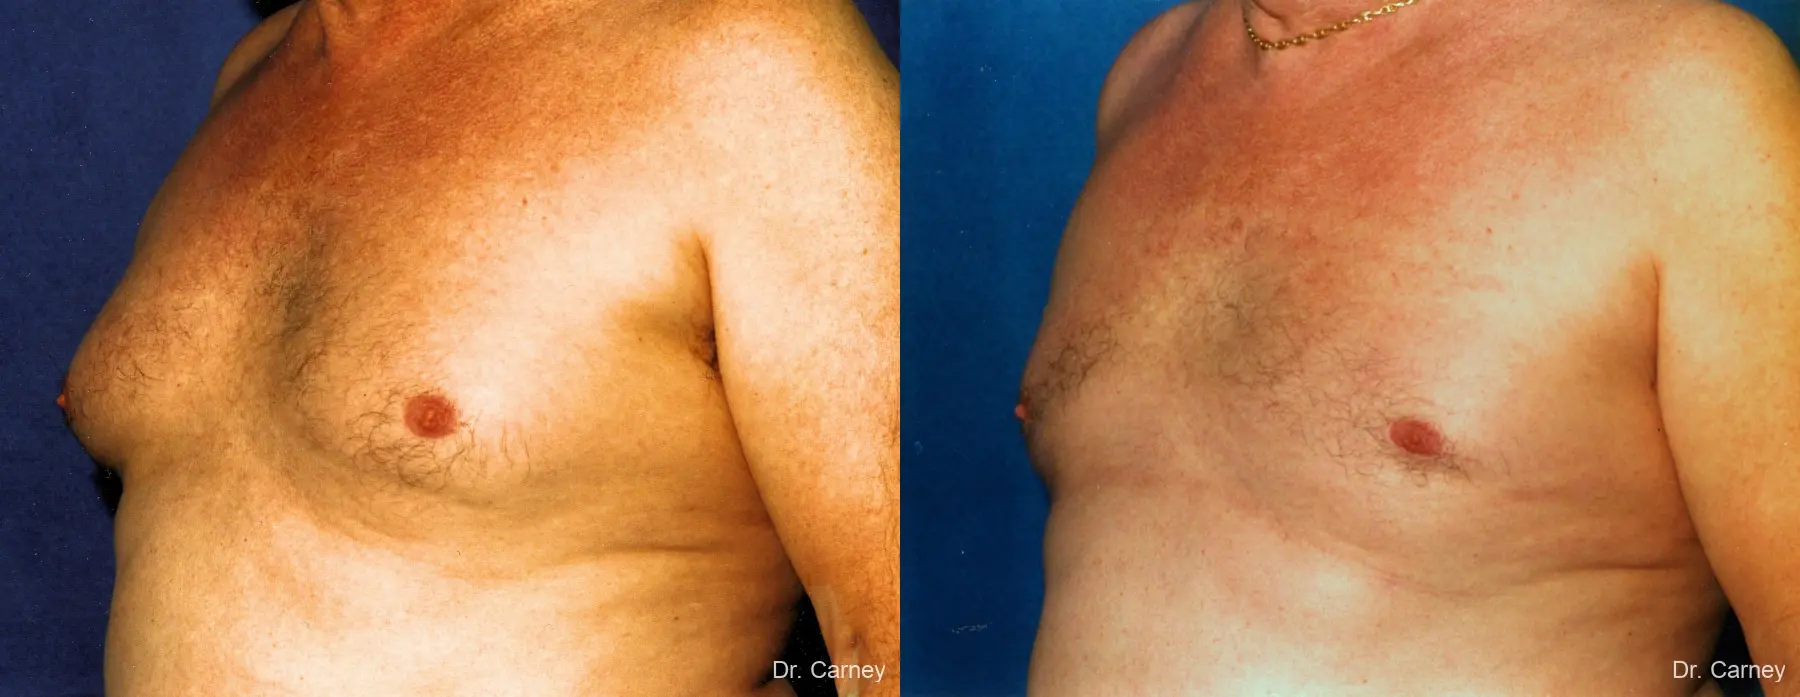 Virginia Beach Gynecomastia 1227 - Before and After 1